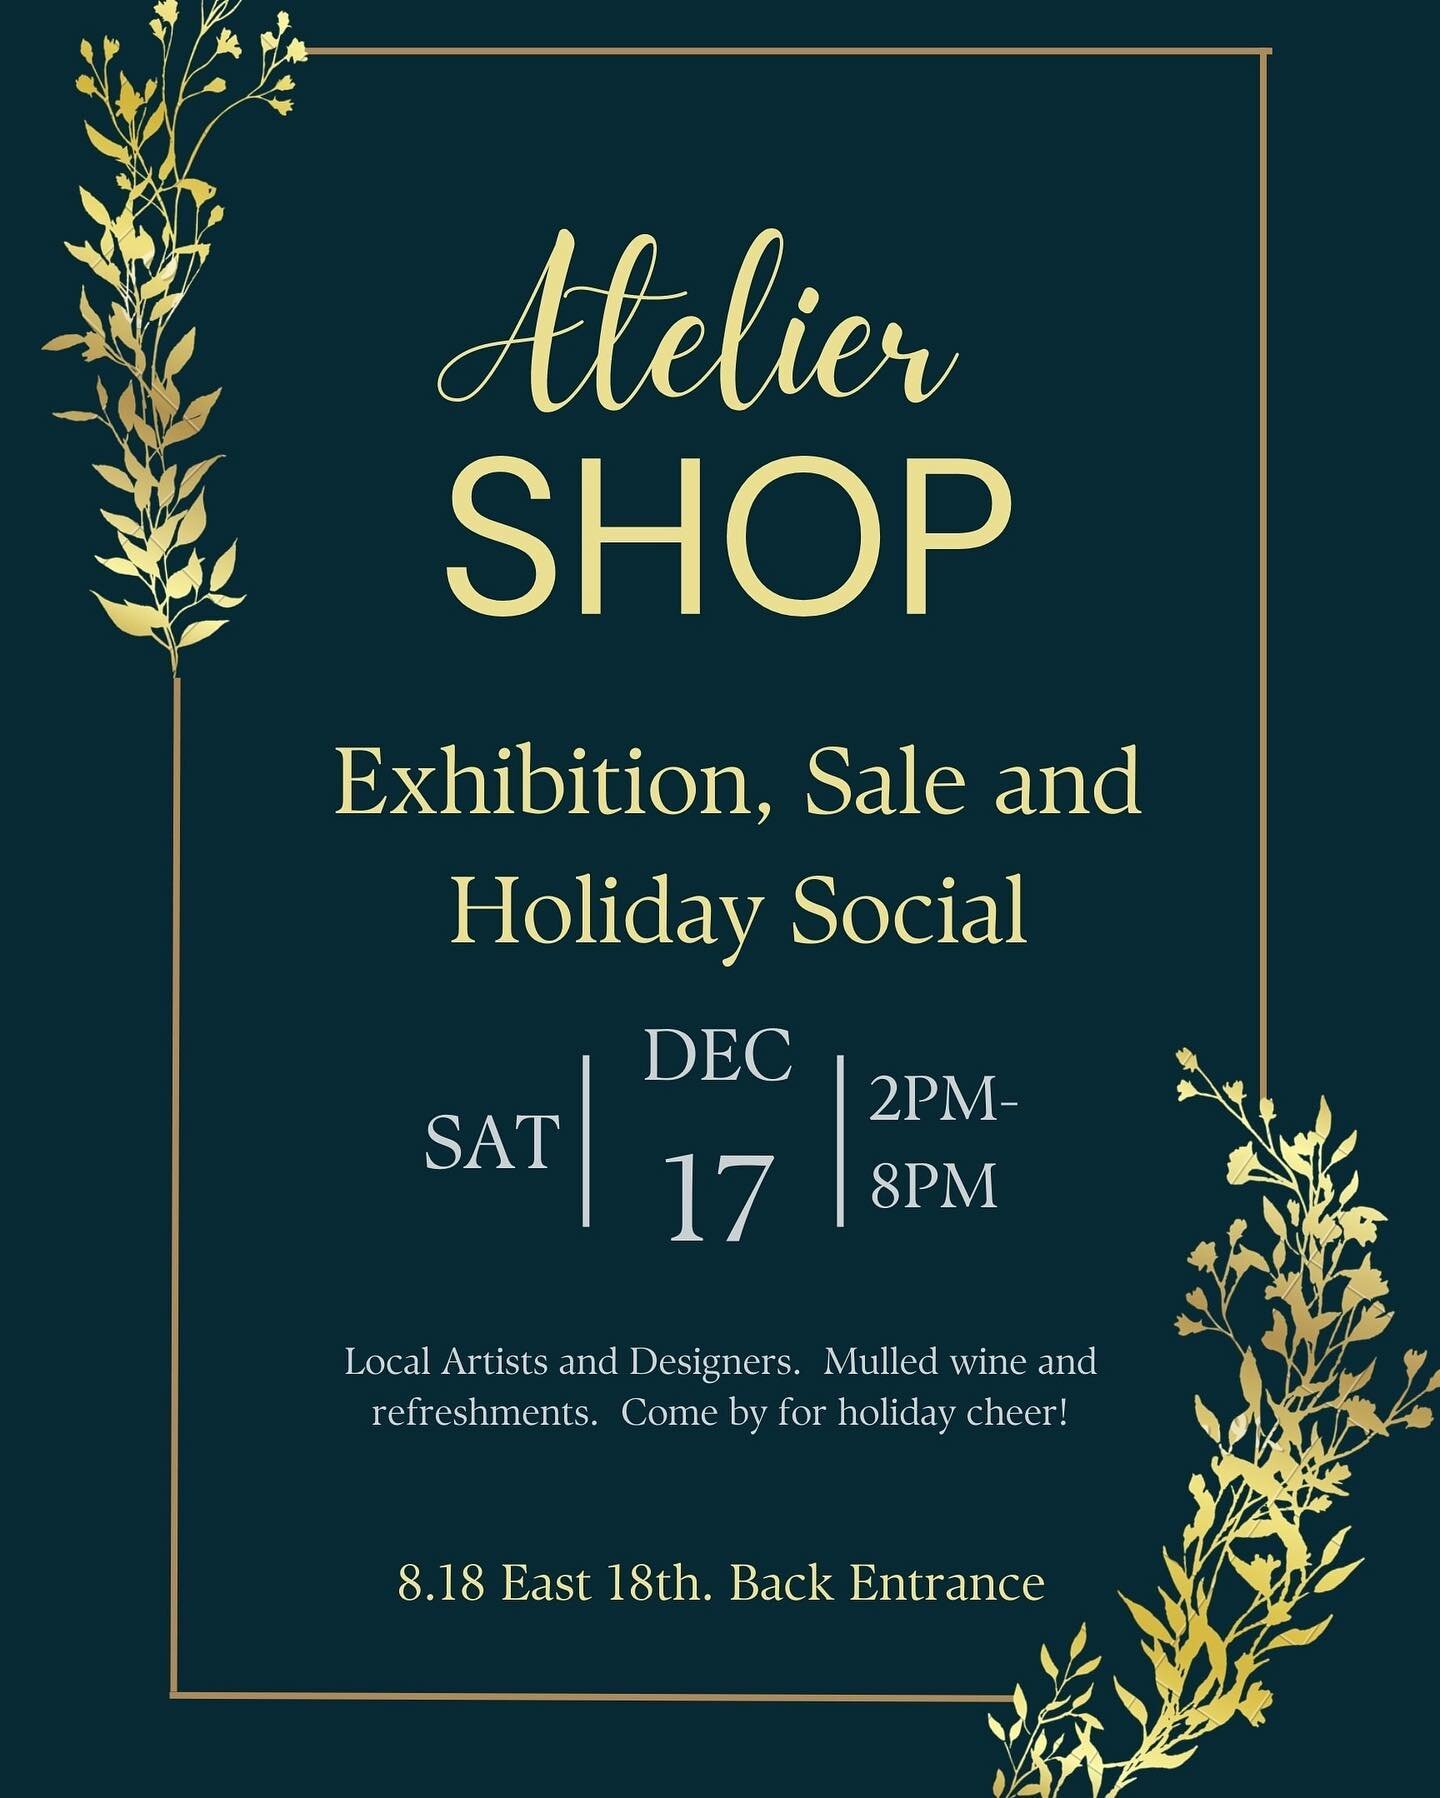 Atelier SHOP

8 east 18th Ave, through the back door. 
December 17th, 2-8pm

My ceramics will be available alongside some other fabulous goodies. 
Warm, cozy vibes with mulled cider.